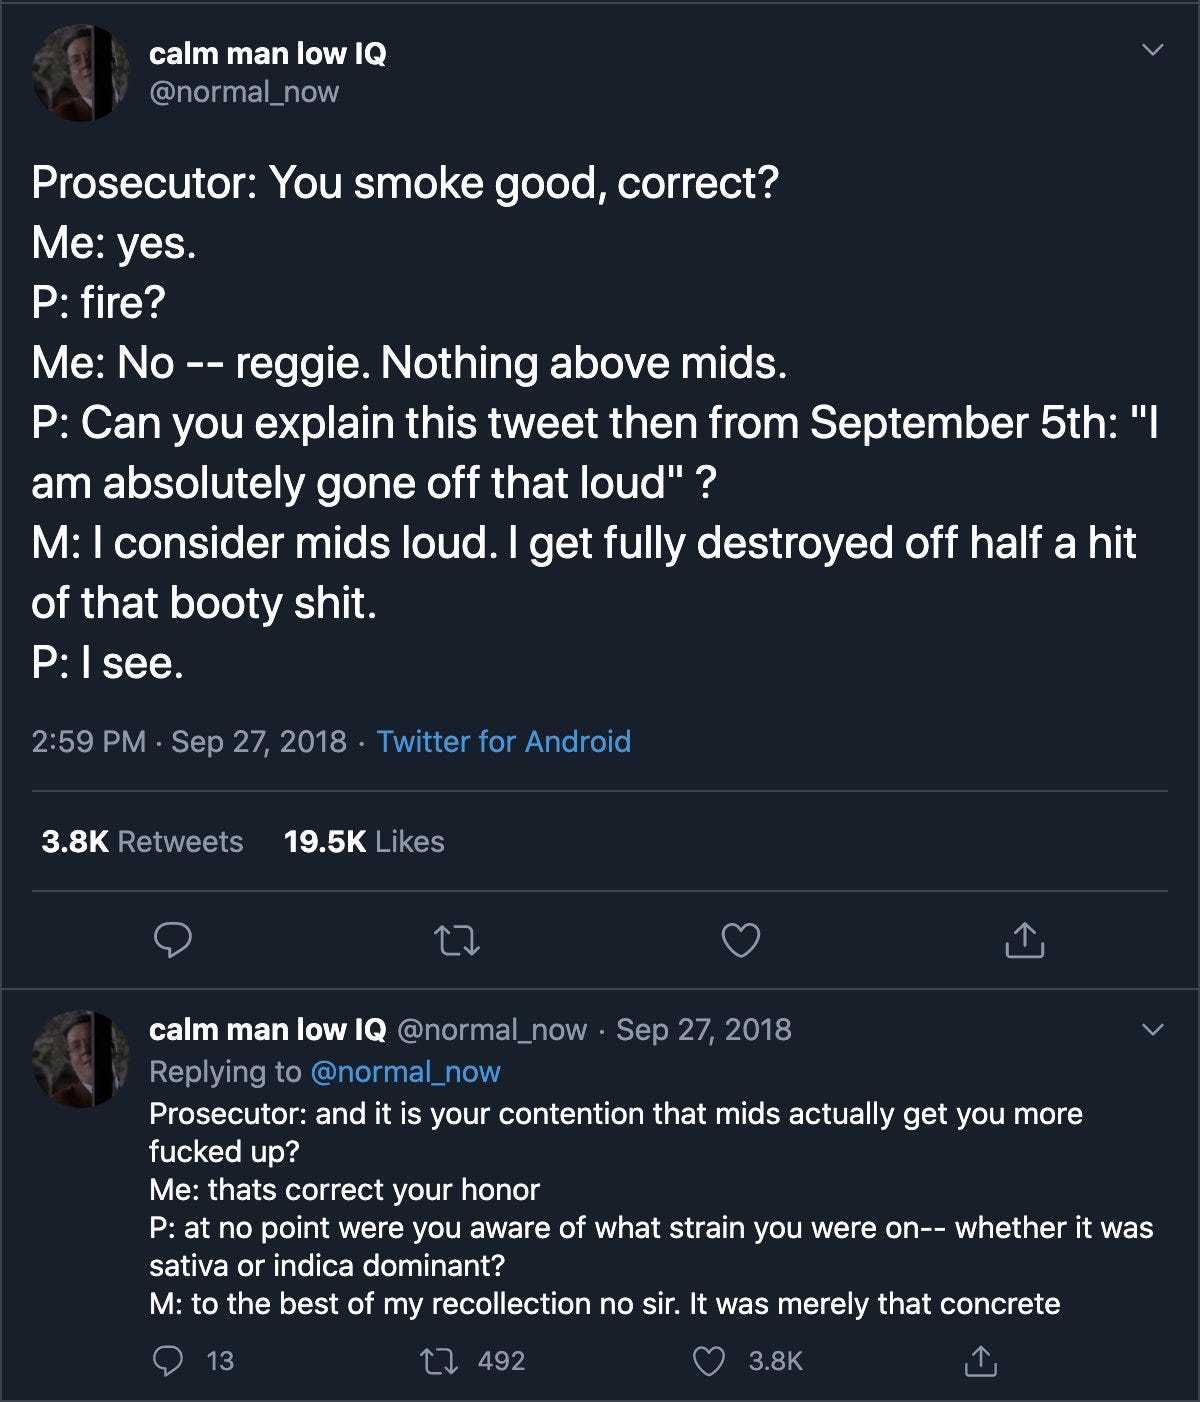 Tweet by @normal_now: “Prosecutor: You smoke good, correct? Me: yes. P: fire? Me: No -- reggie. Nothing above mids. P: Can you explain this tweet then from September 5th: "I am absolutely gone off that loud"? M: I consider mids loud. I get fully destroyed off half a hit of that booty shit. P: I see.” And a reply which continues: “Prosecutor: and it is your contention that mids actually get you more fucked up? Me: thats correct your honor P: at no point were you aware of what strain you were on-- whether it was sativa or indica dominant? M: to the best of my recollection no sir. It was merely that concrete”